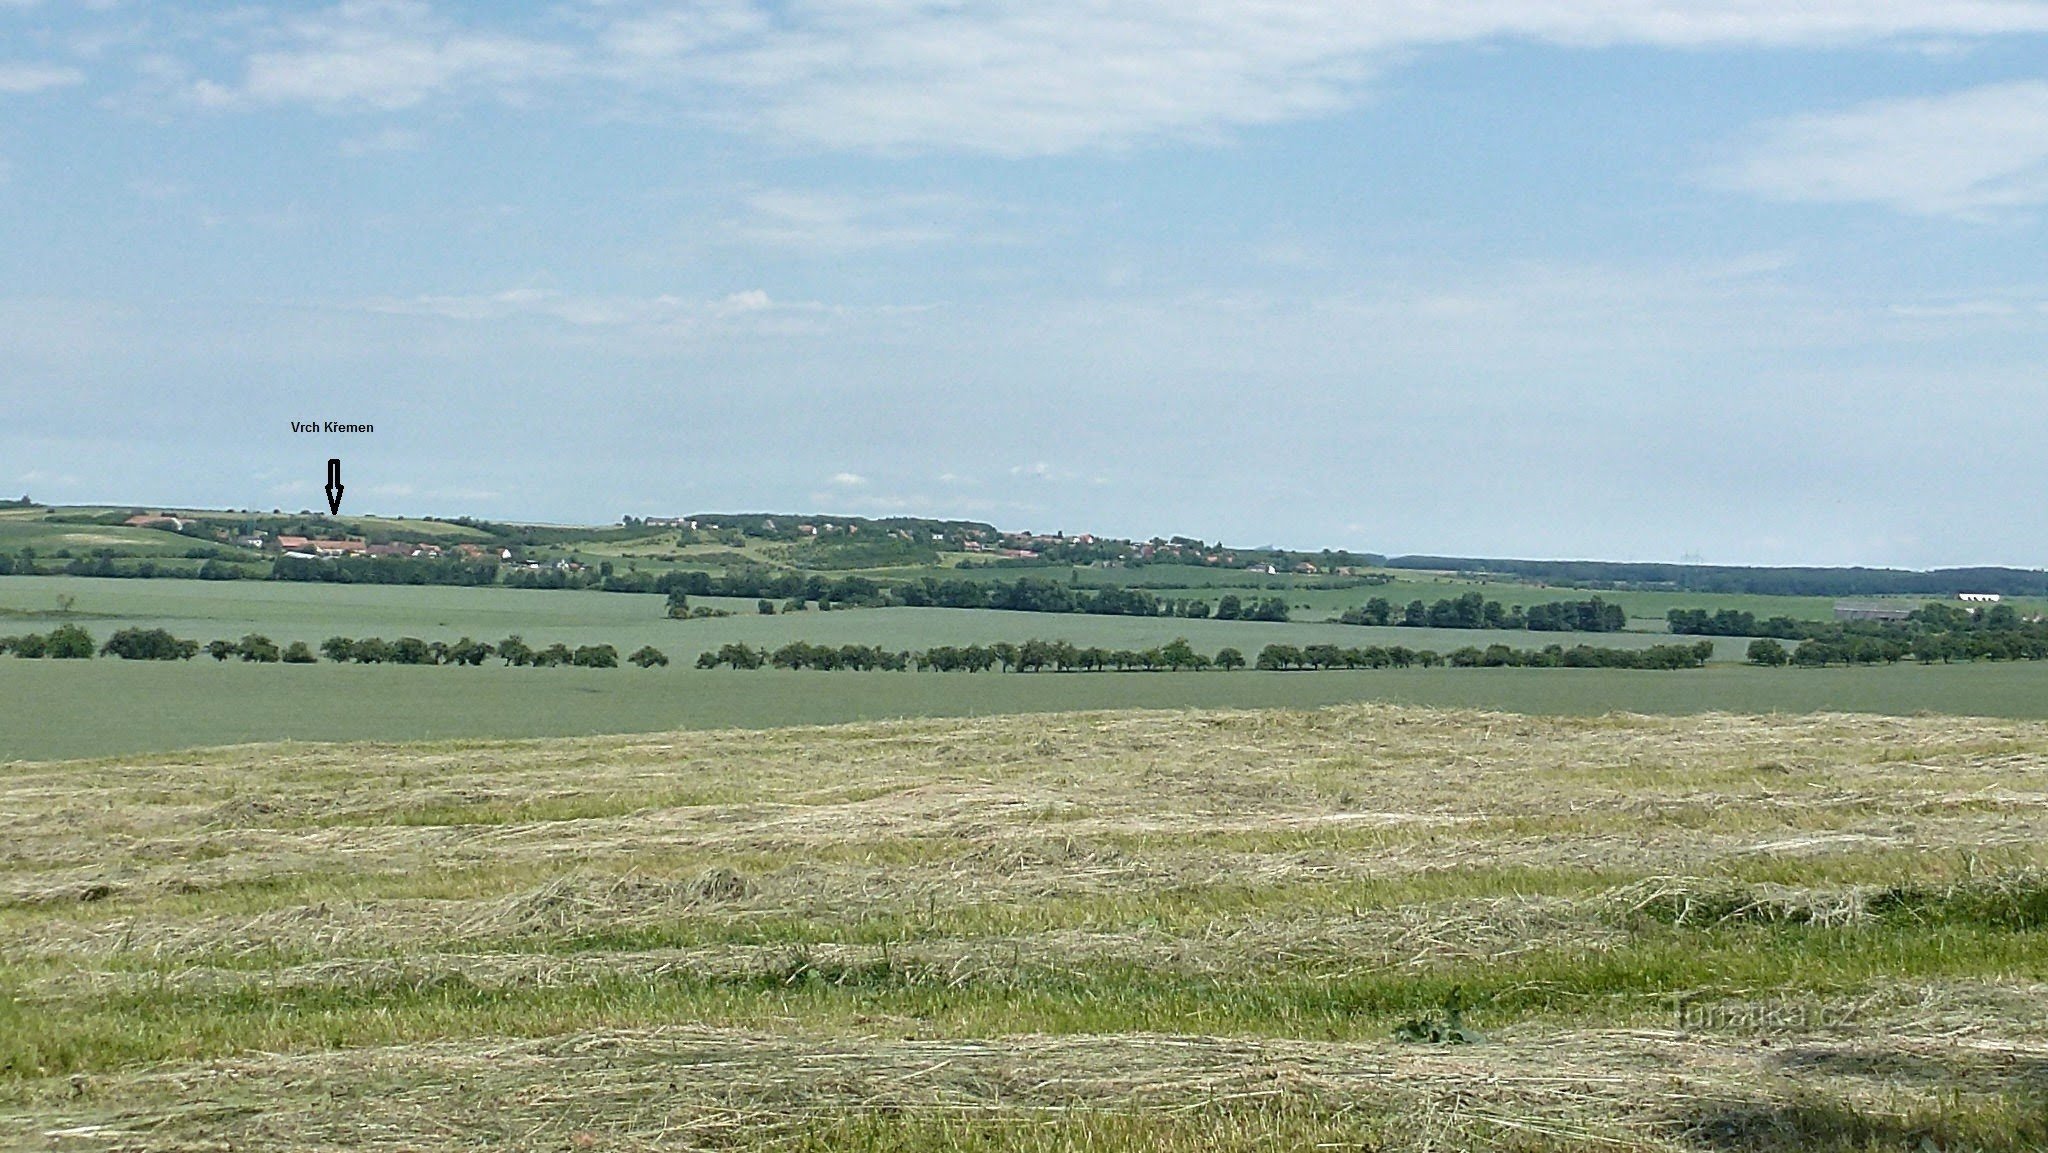 Vrch Křemen is a low elongated hill oriented in an east-west direction. At c